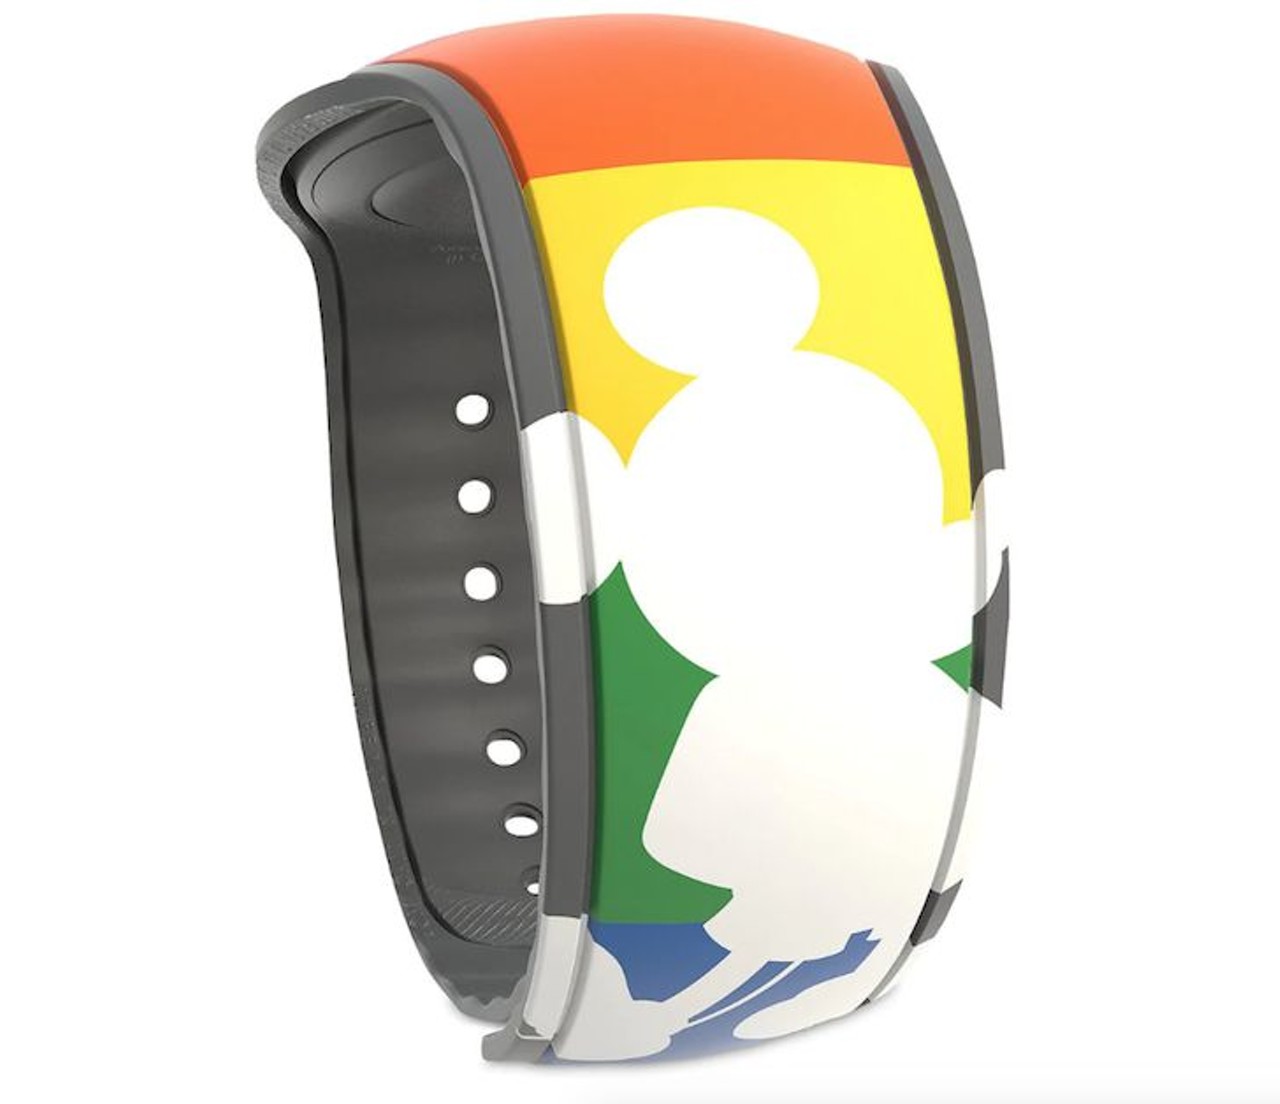 Mickey Mouse MagicBand 2
One Band fits most for the second edition of the Mickey Mouse MagicBand complete with a rainbow design and a white Mickey Mouse shadow for $24.99.
Photo via shopDisney